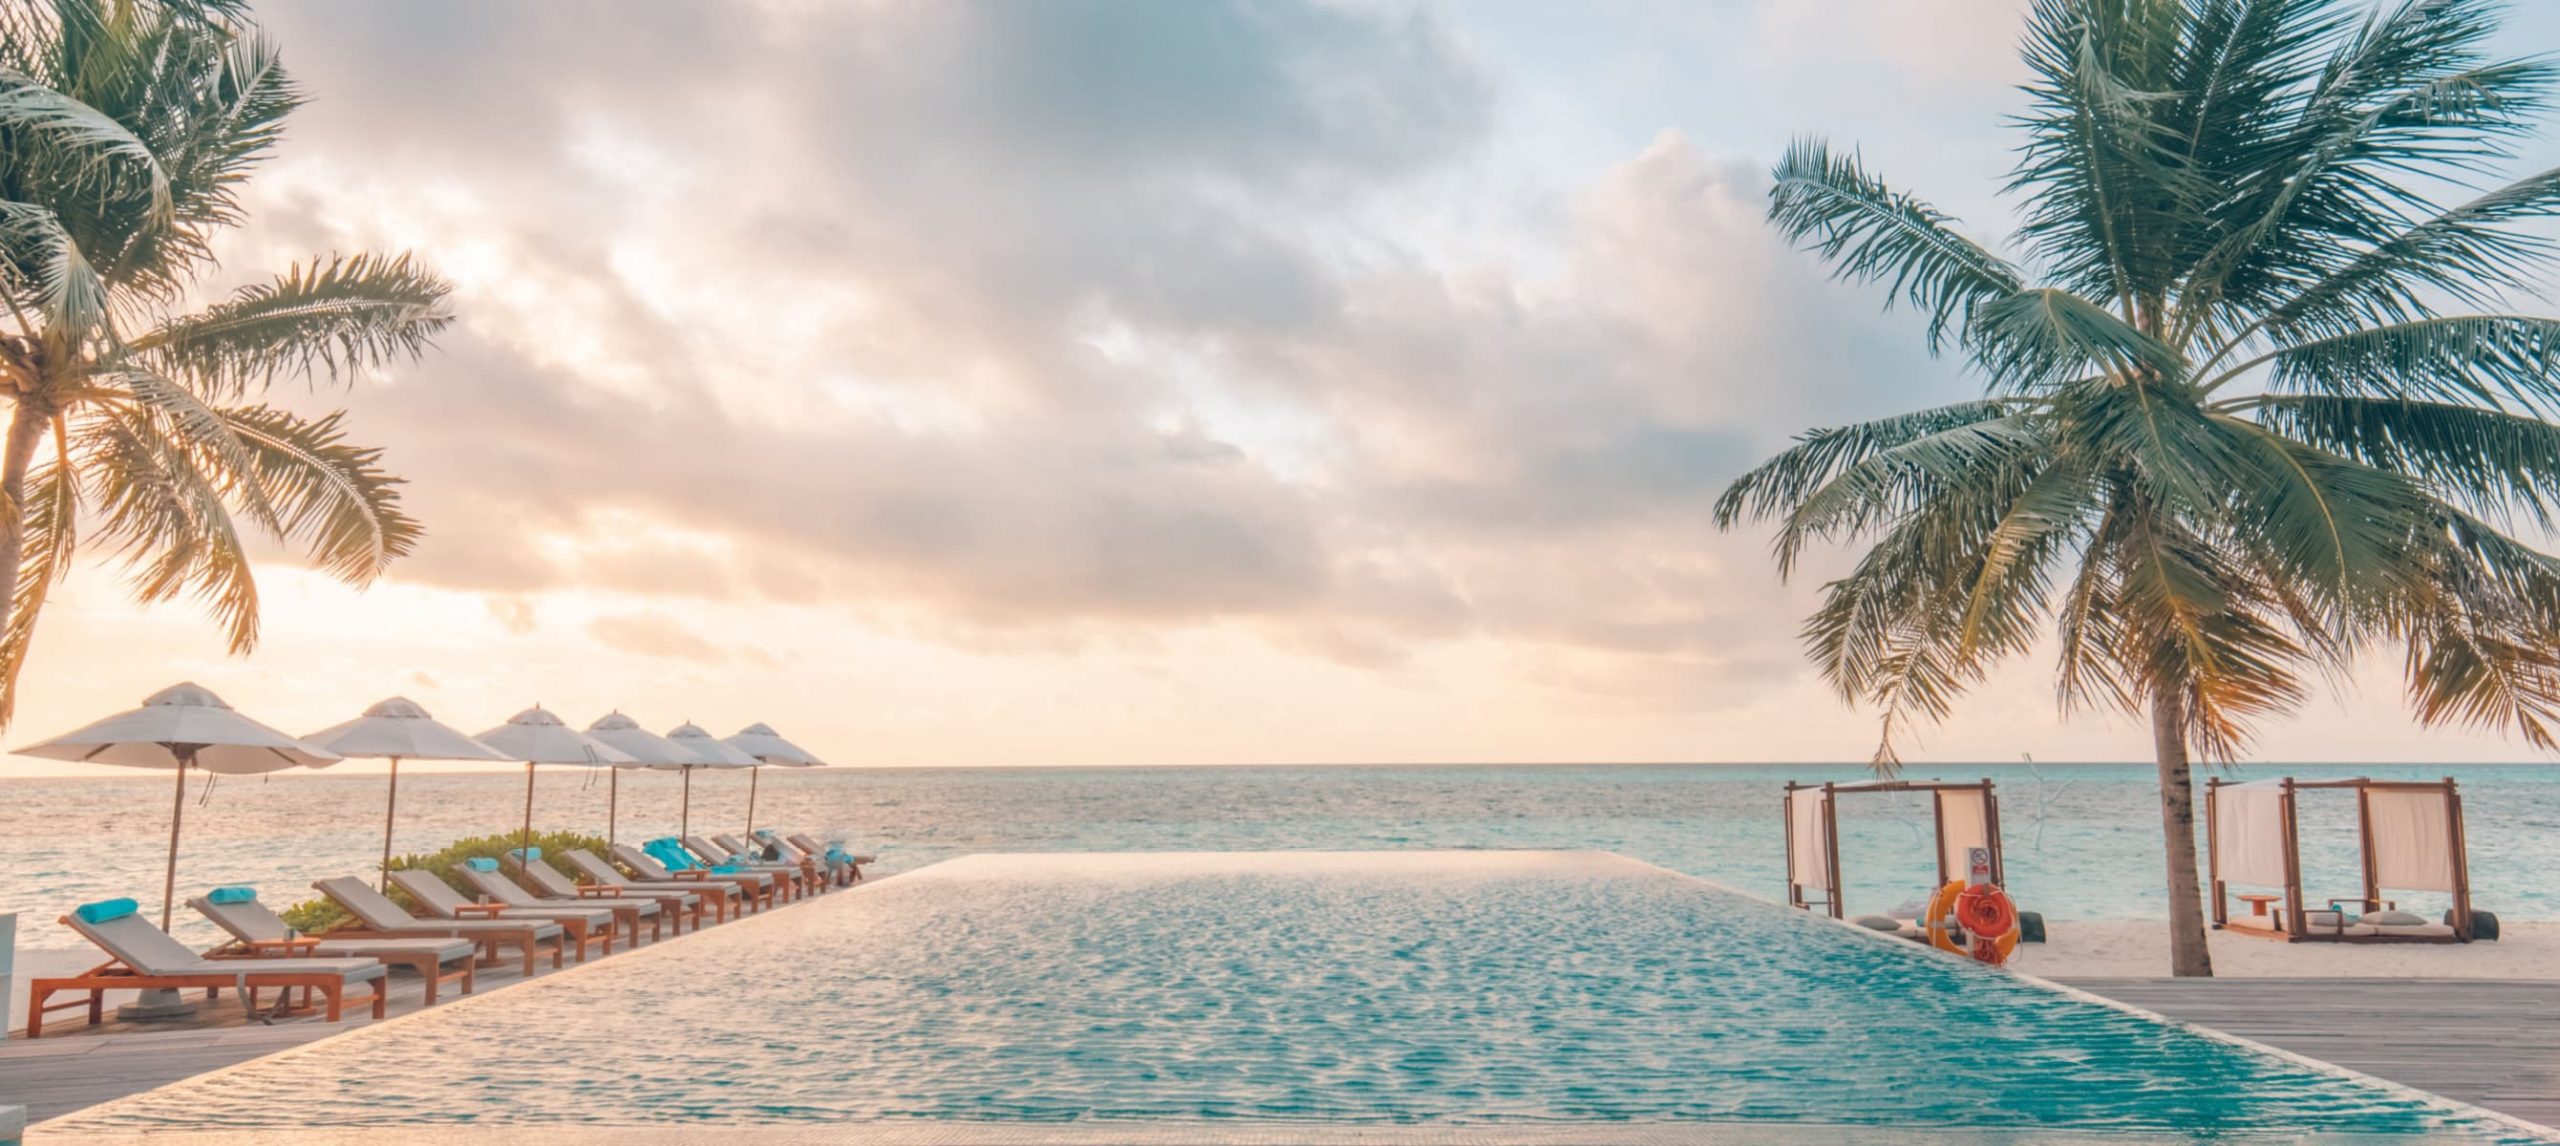 The inifity pool of a luxury beach hotel at sunset.